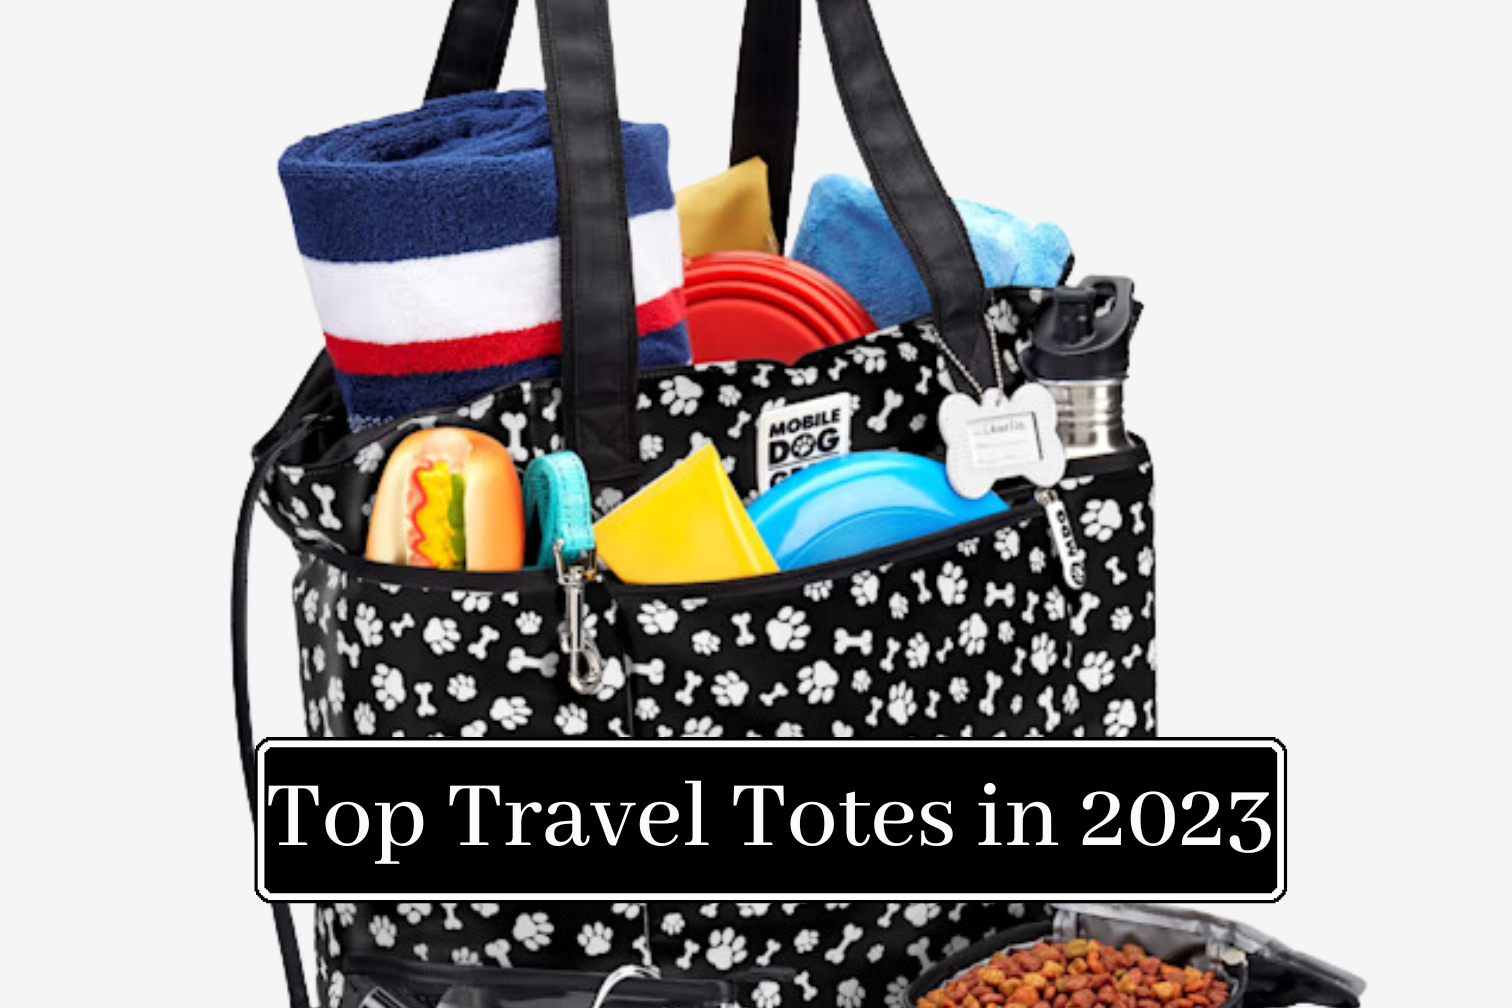 Dog gear travel totes for dogs in 2023 